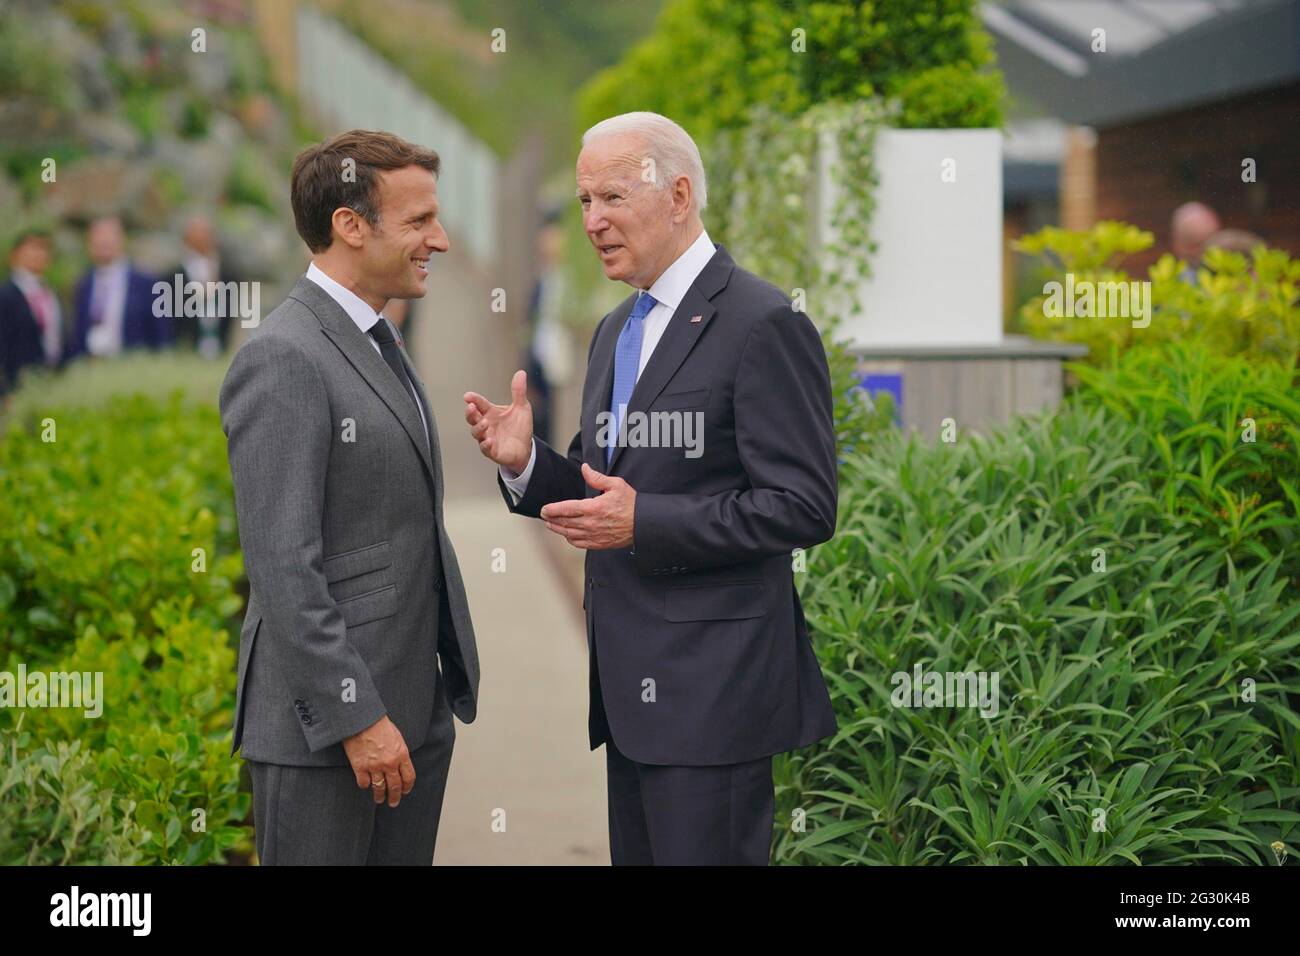 U.S President Joe Biden talks with French President Emmanuel Macron, left, following the group photo at the G7 Summit at the Carbis Bay Hotel, June 11, 2021 in Carbis Bay, Cornwall, United Kingdom. Stock Photo